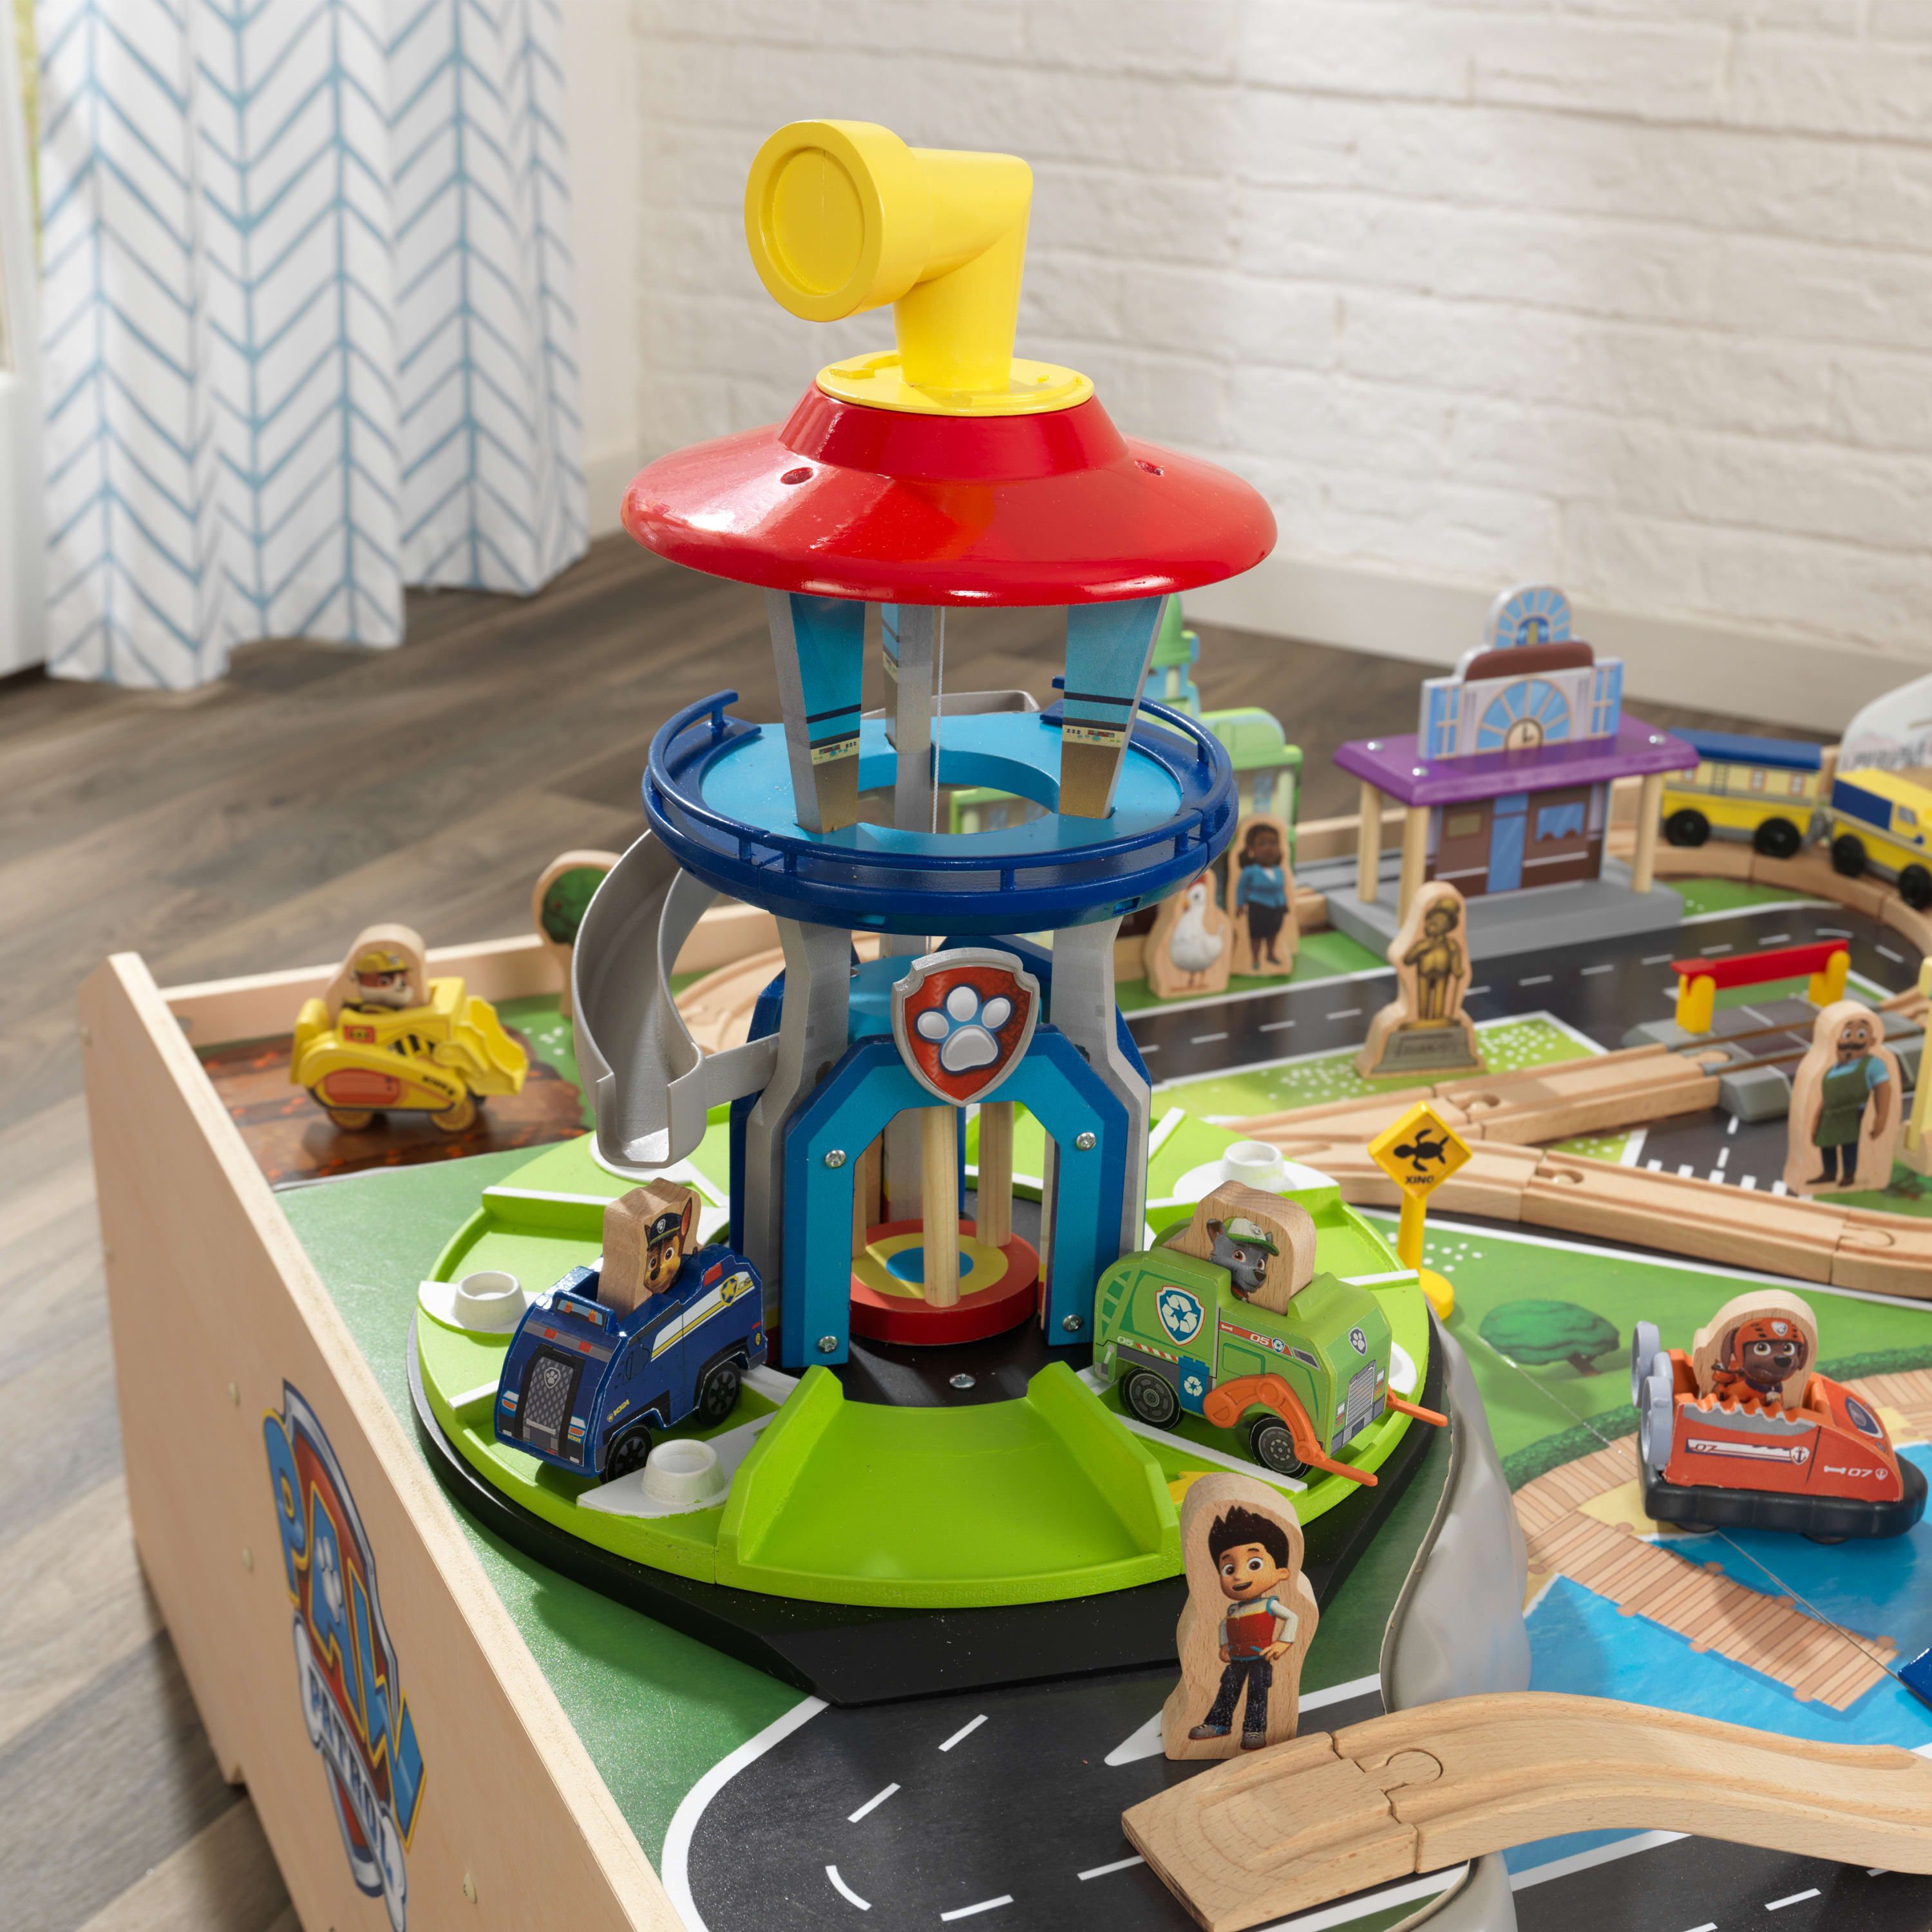 KidKraft PAW Patrol Adventure Bay Wooden Play Table with 73 Accessories - image 4 of 10